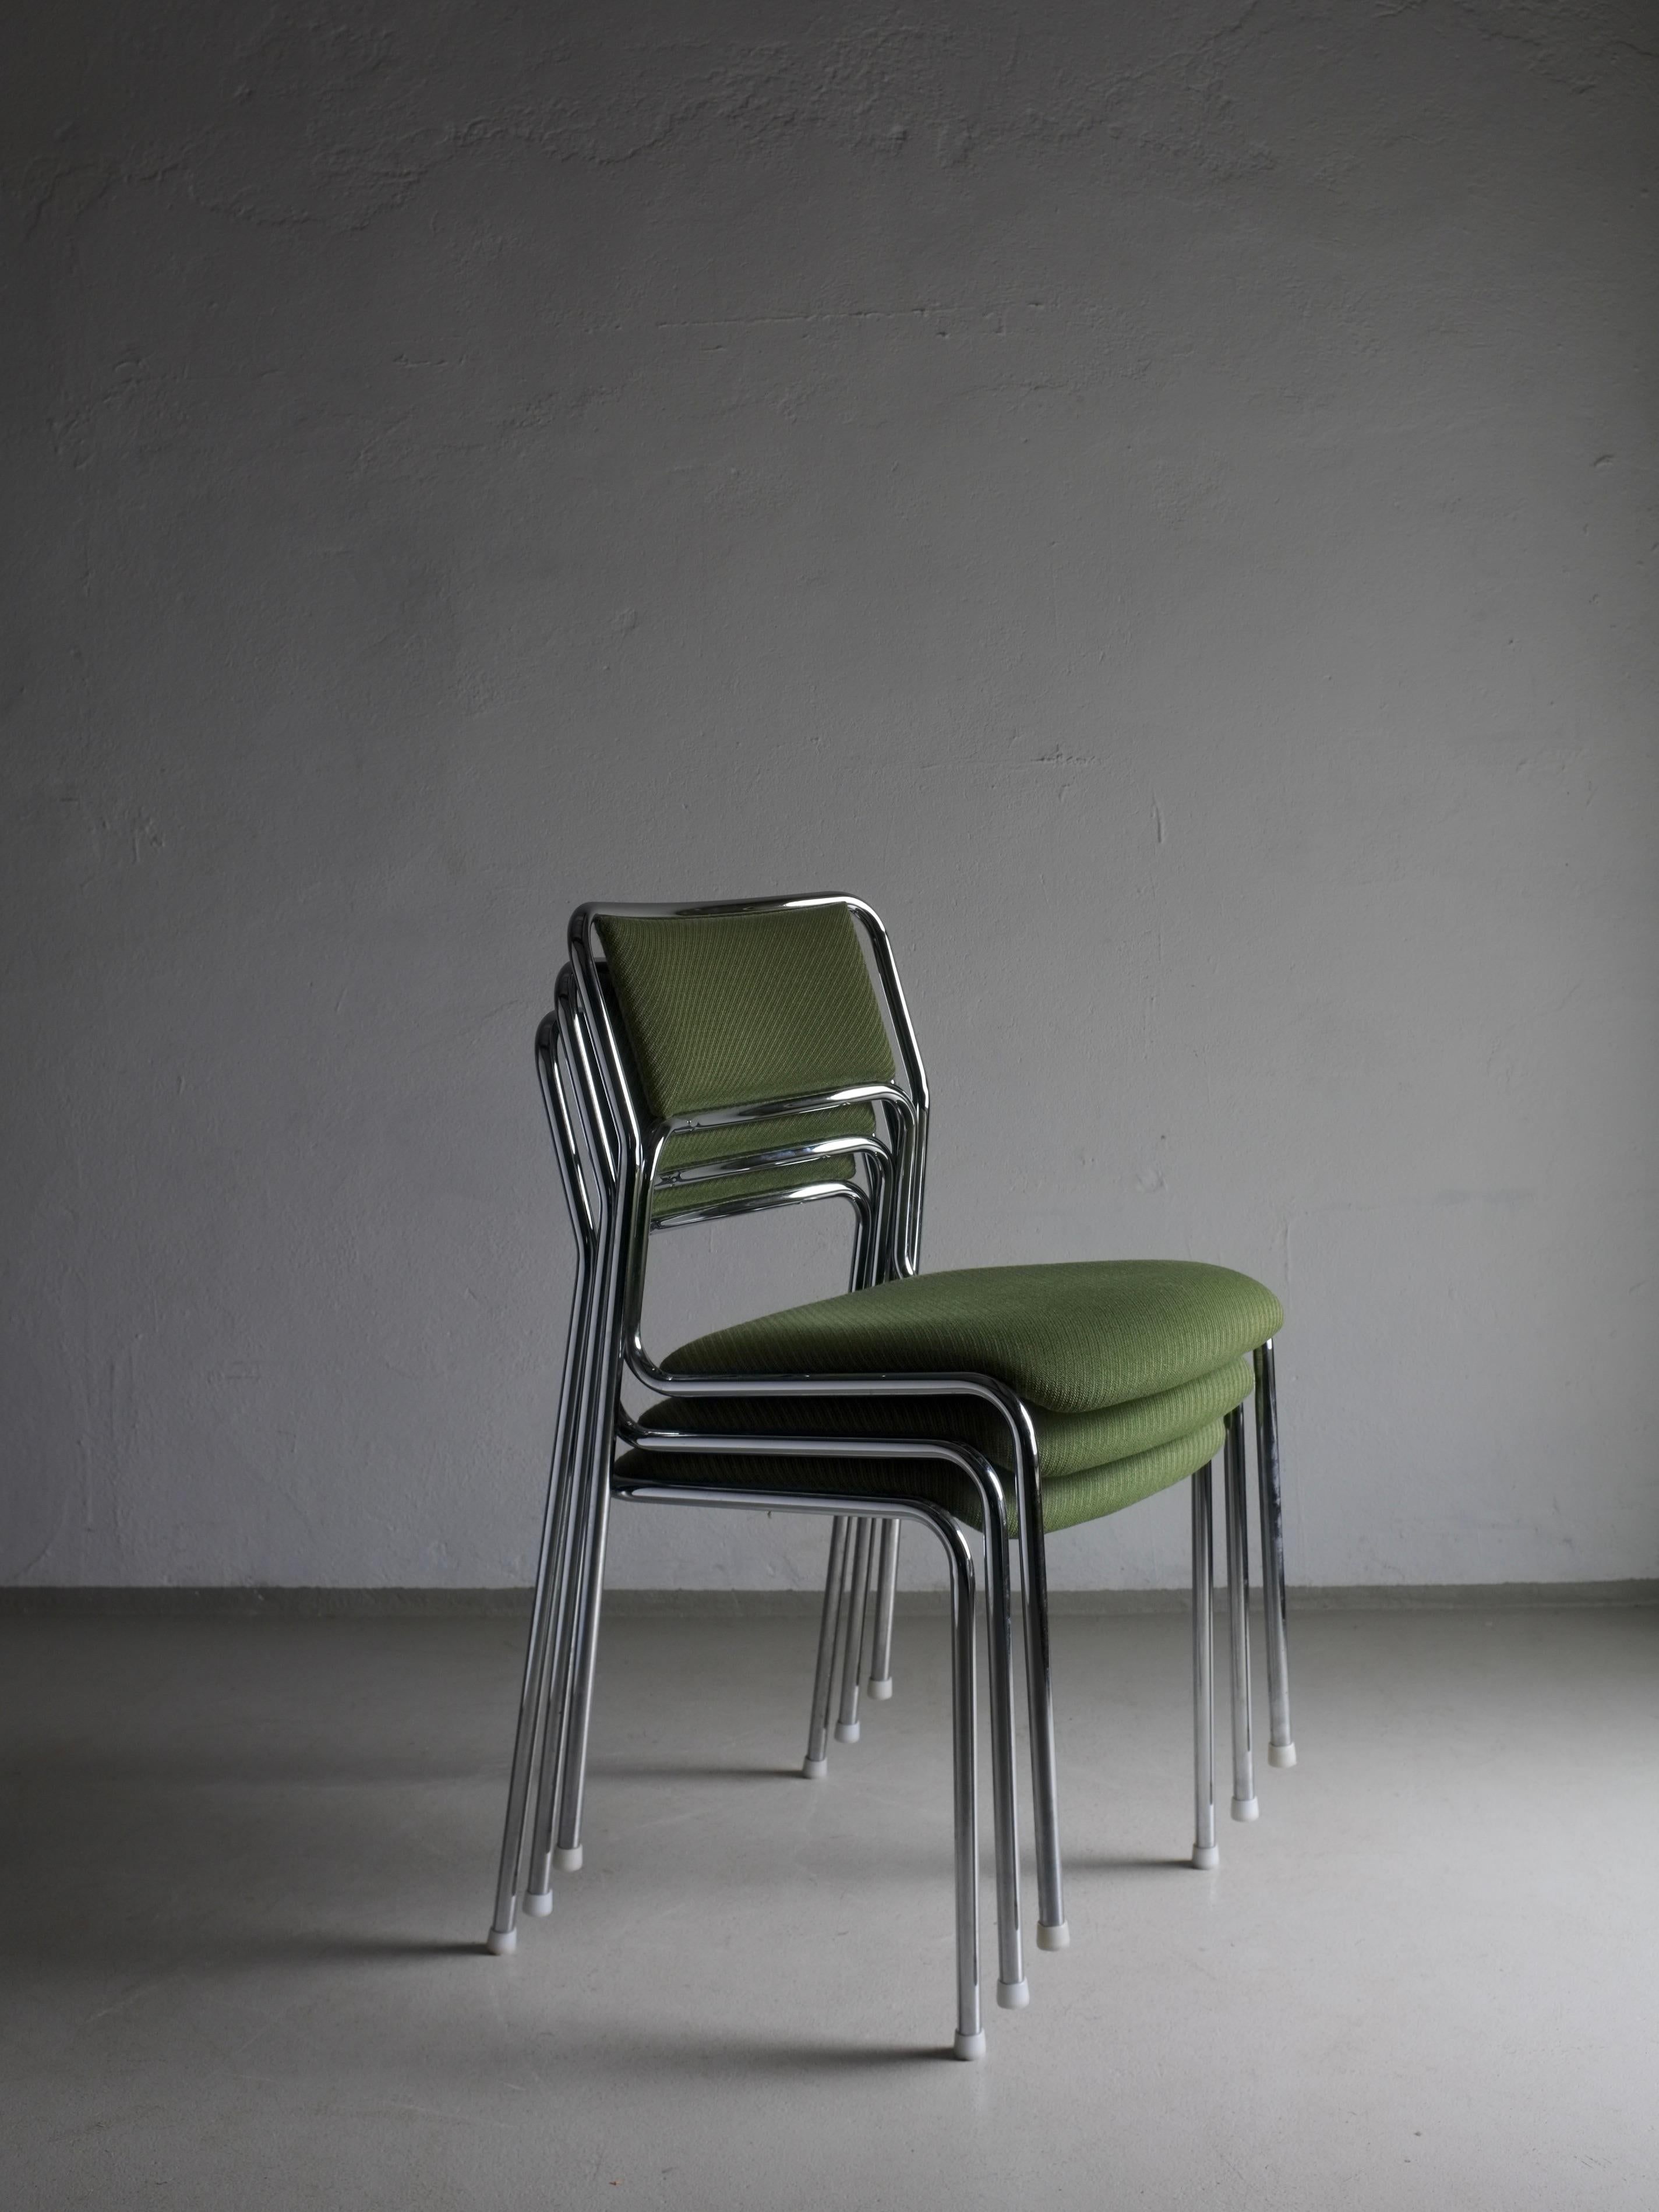 Set of 3 tubular steel chairs with beautiful green hue upholstery.

Additional information:
Origin: Sweden 
Period: 1970s
Dimensions: W 47 cm x D 47 cm x H 79 cm, H(seat) 44 cm 
Condition: Good vintage condition; original wool upholstery may show